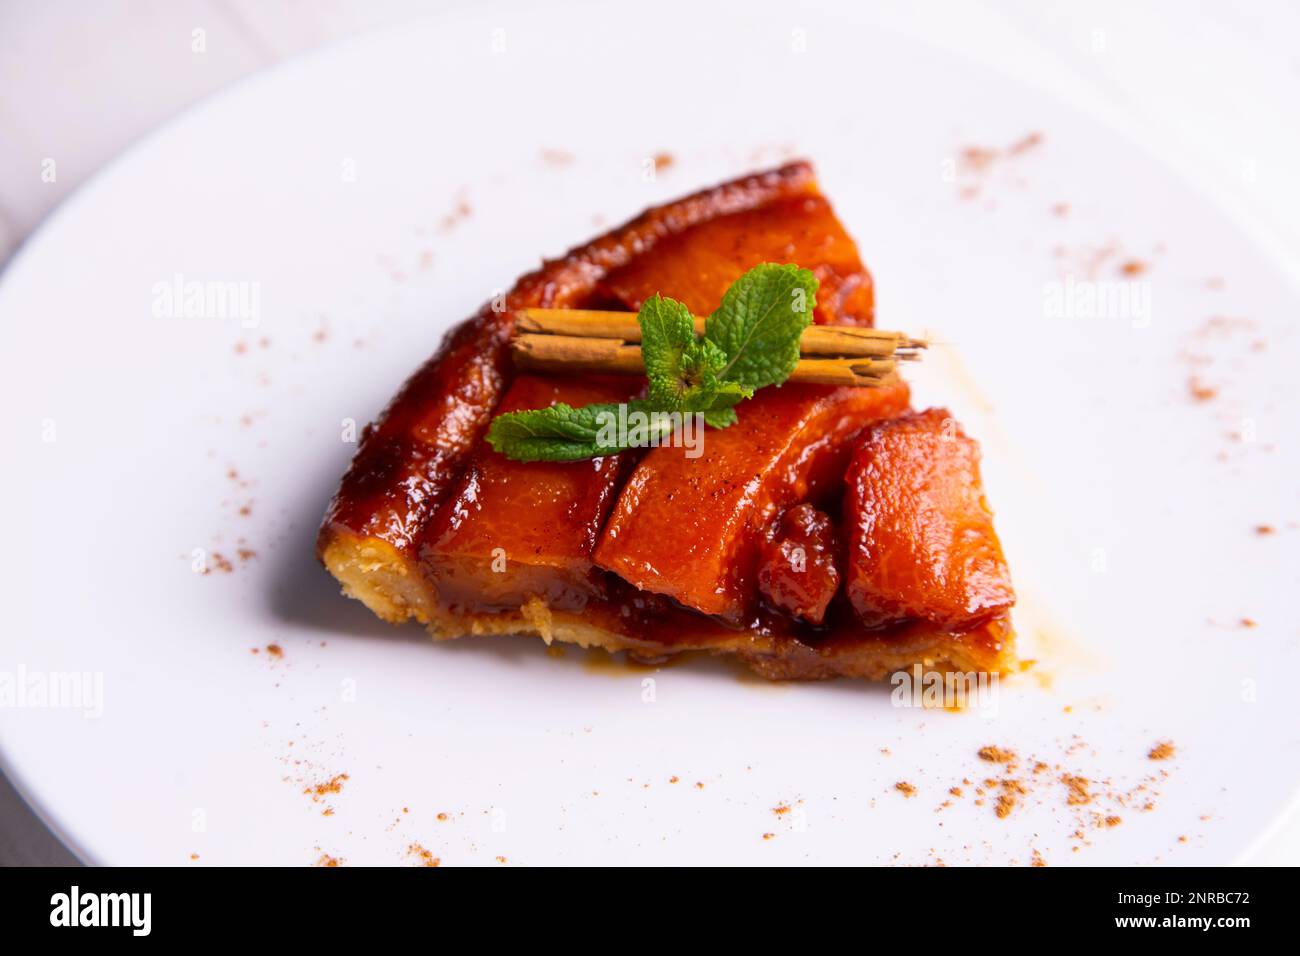 Papaya tarte tatin. Its peculiarity is that it is an upside-down cake, that is, for its preparation the fruit is placed below and the dough on top. Stock Photo